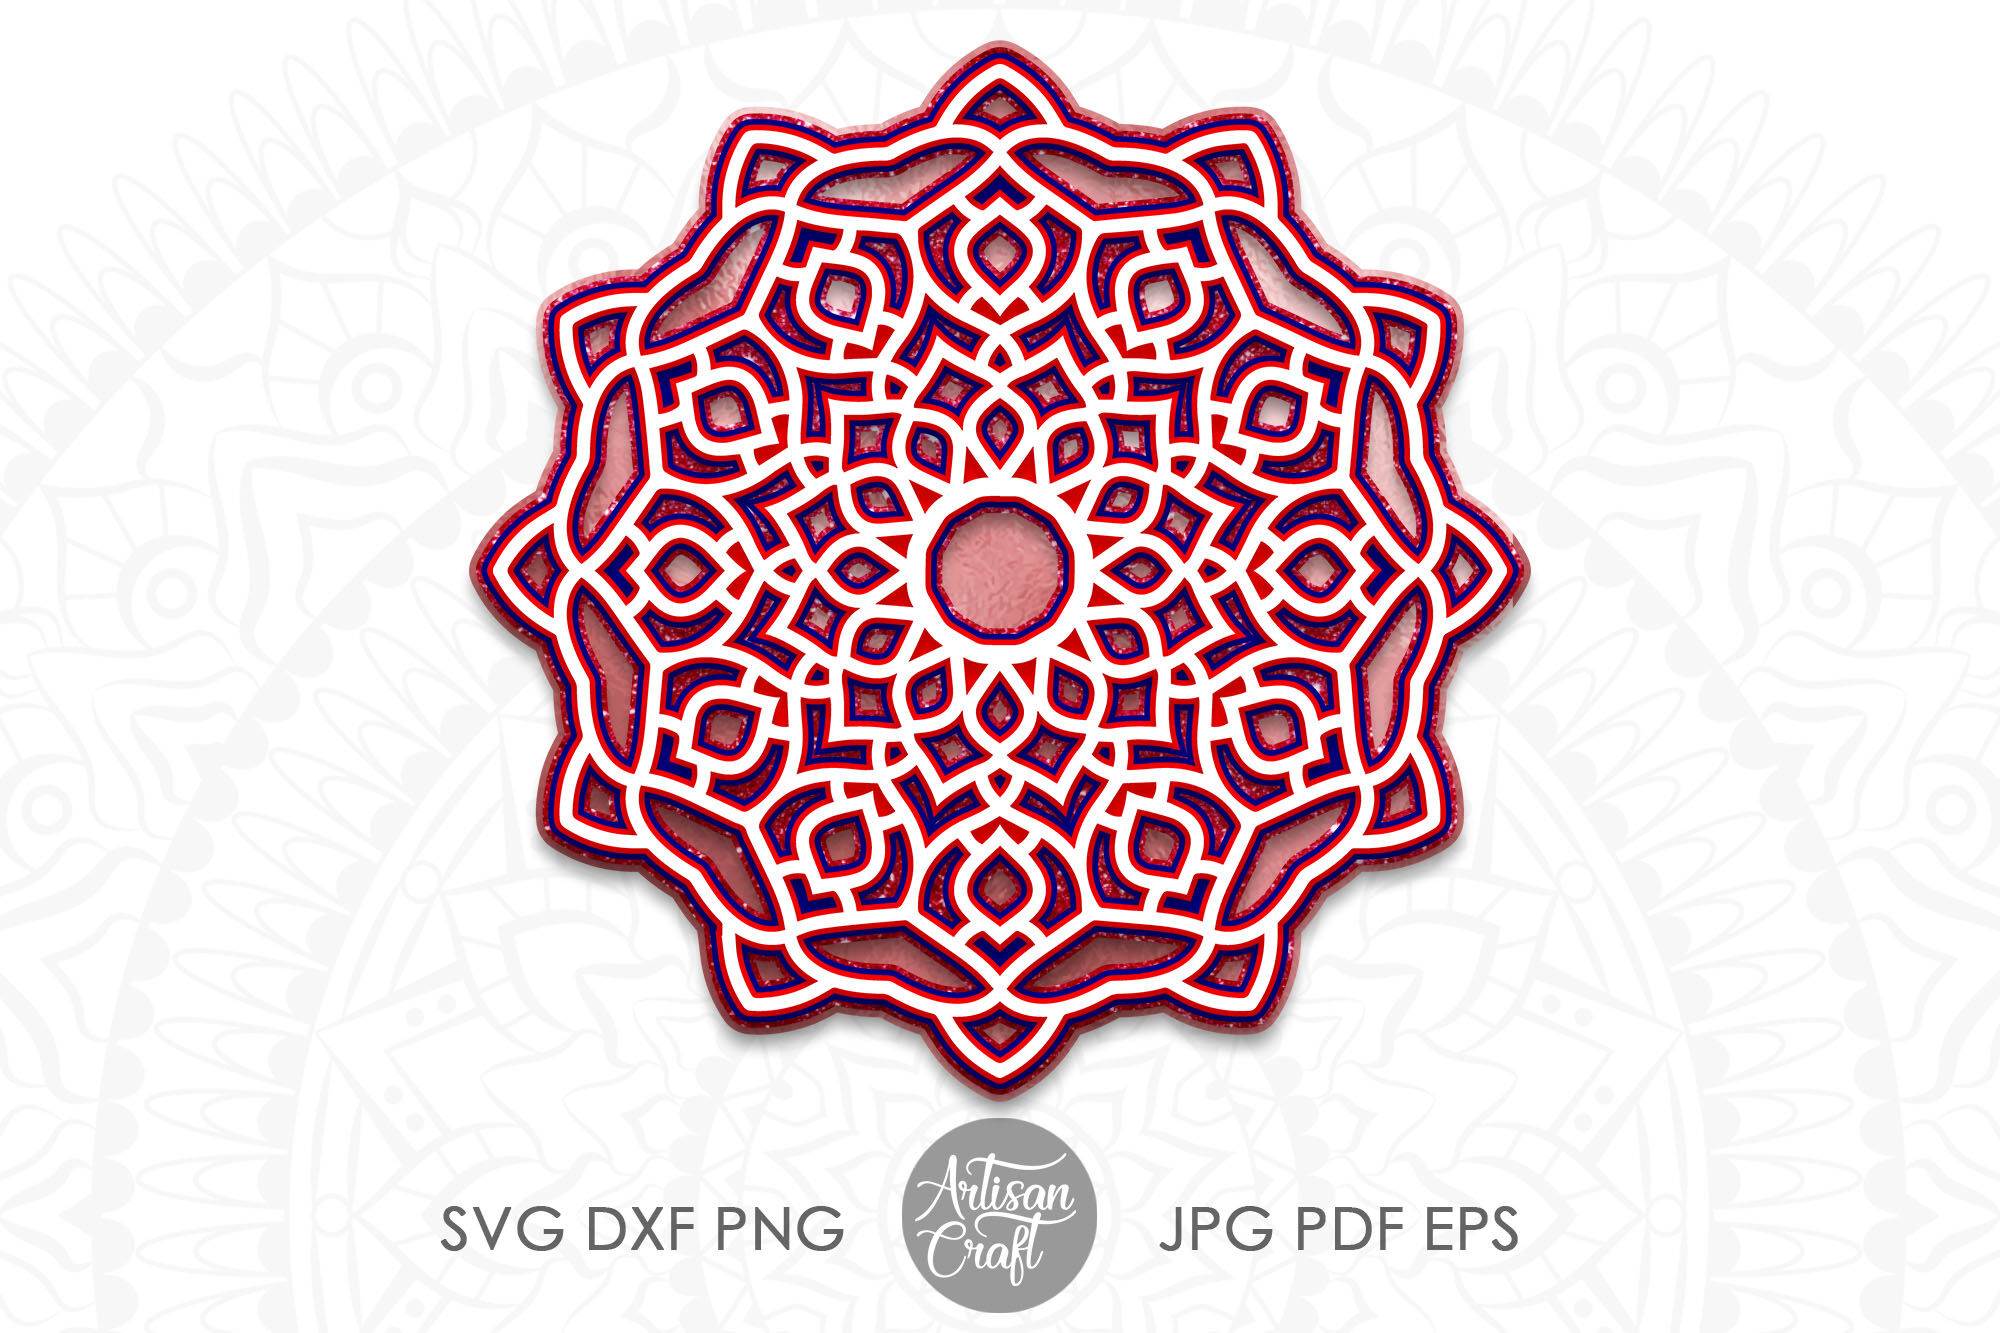 Download 3d Layered Design Multi Layered Mandala Svg Files For Cricut Silhouette Paper Crafting Lighthouse Mandala Svg File Laser Scroll Saw Art Collectibles Drawing Illustration Safarni Org